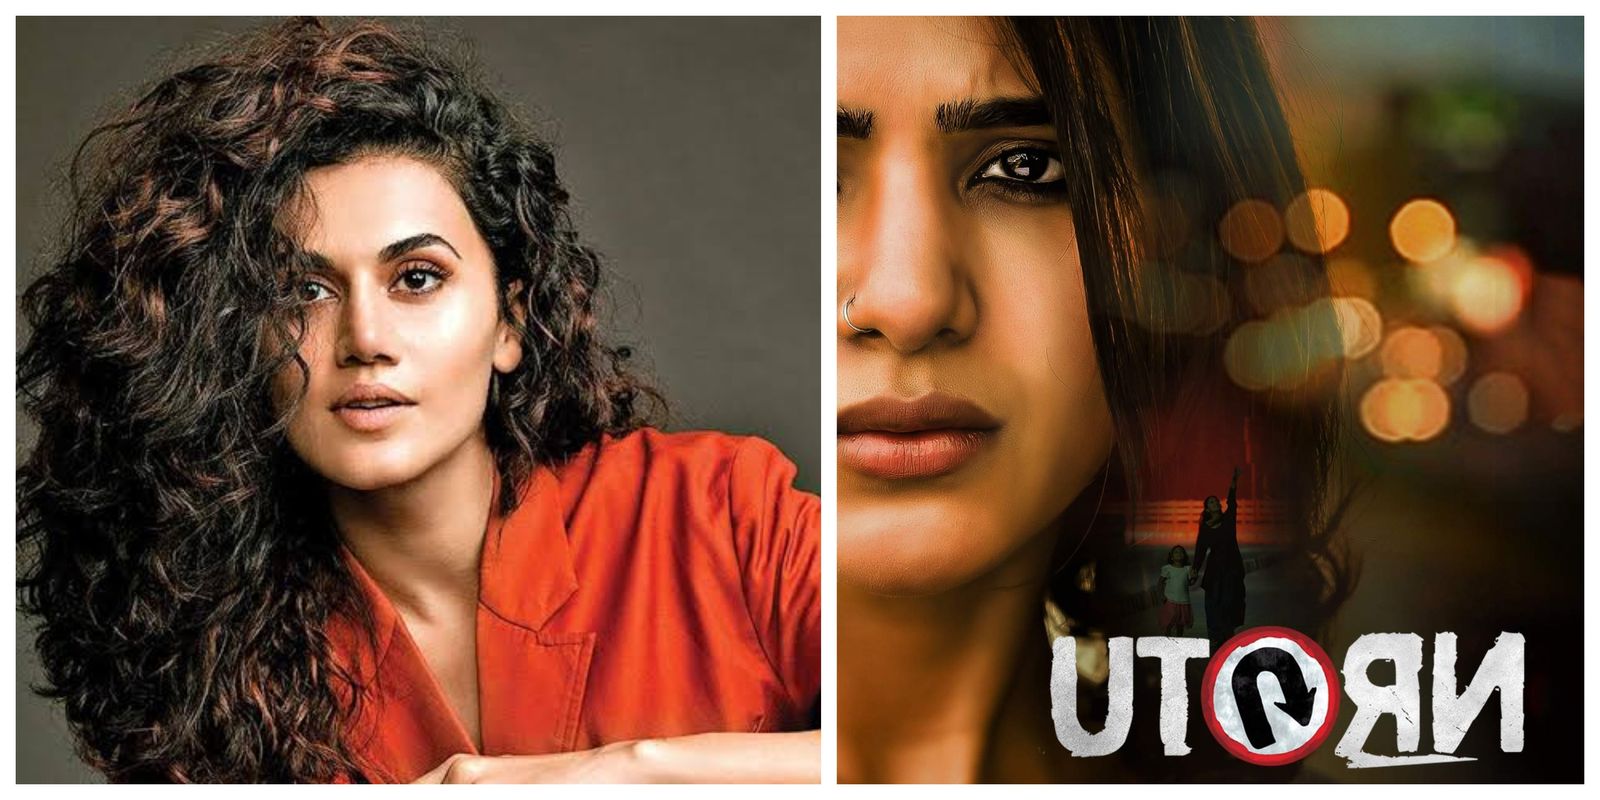 Taapsee Pannu To Be Cast In Samantha Akkineni’s Role In The Hindi Remake Of U Turn?